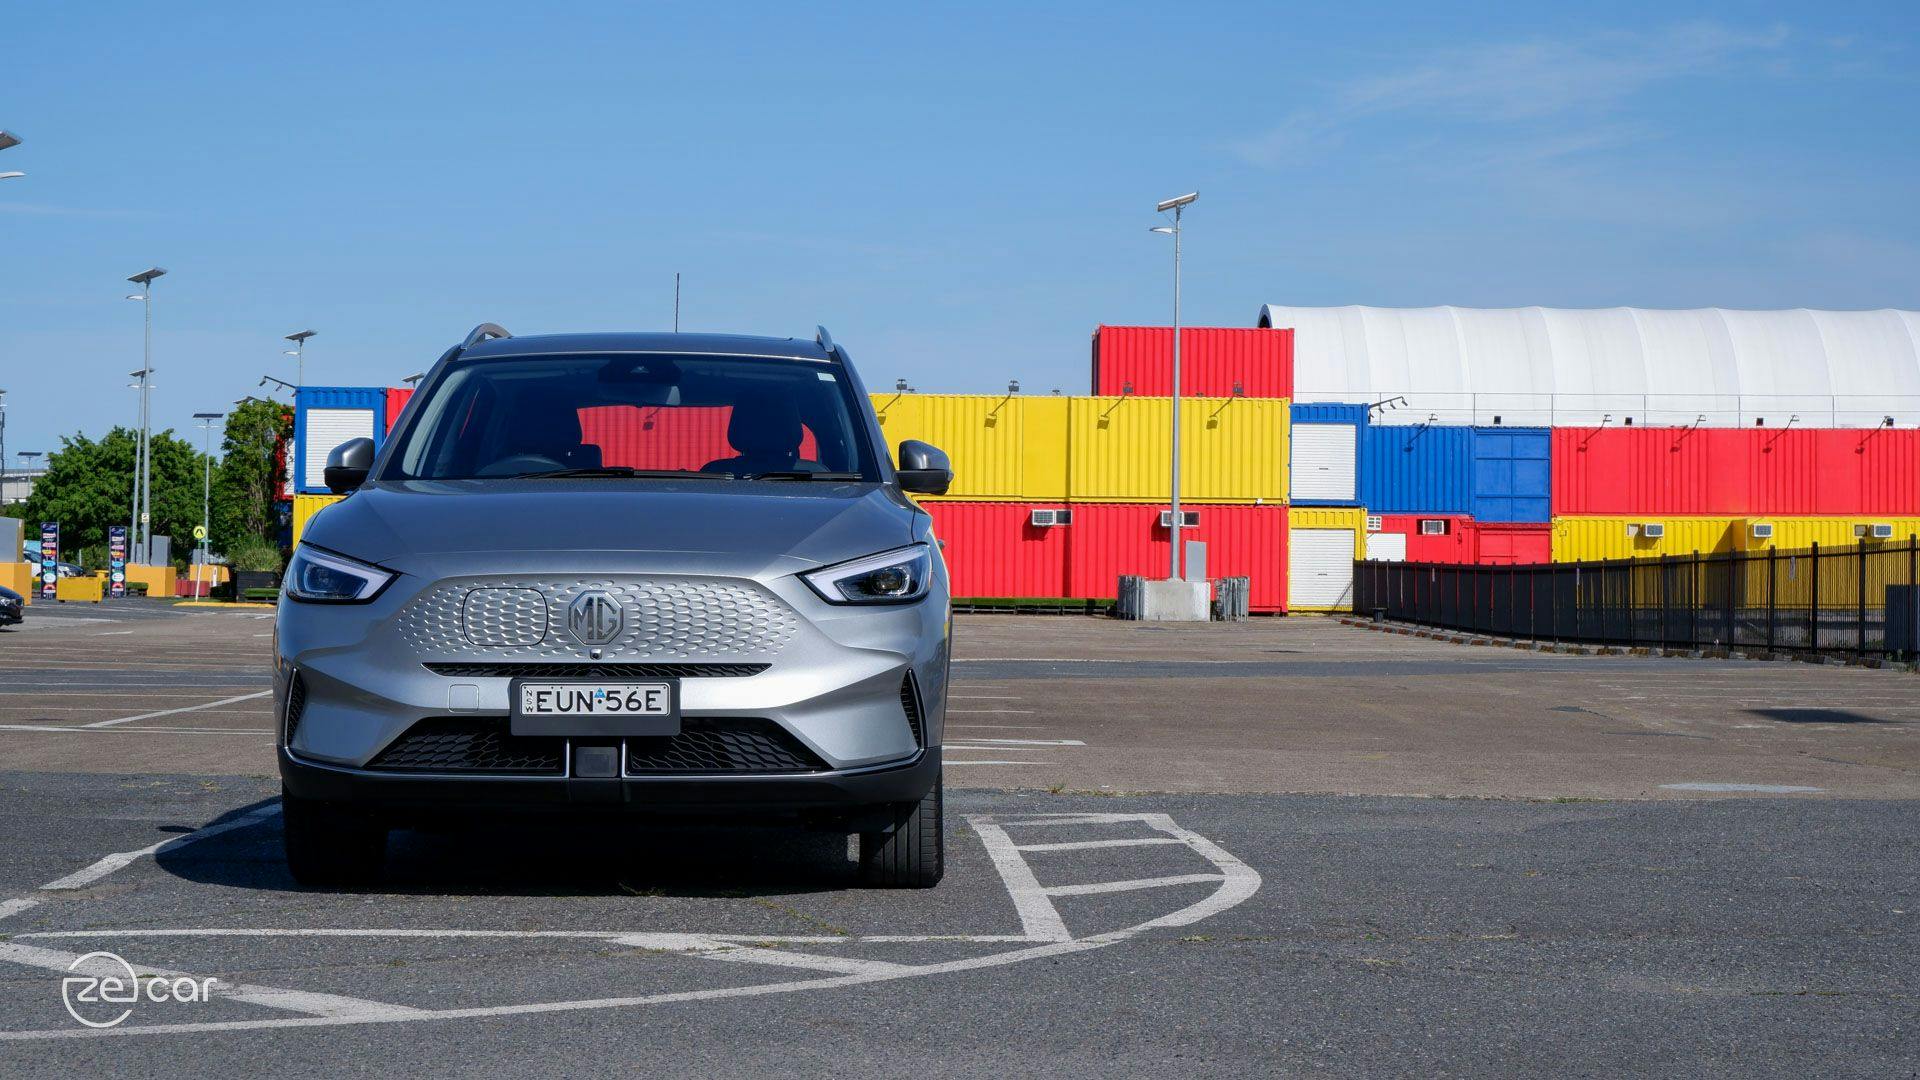 Silver MG ZS EV in front of colourful shipping containers